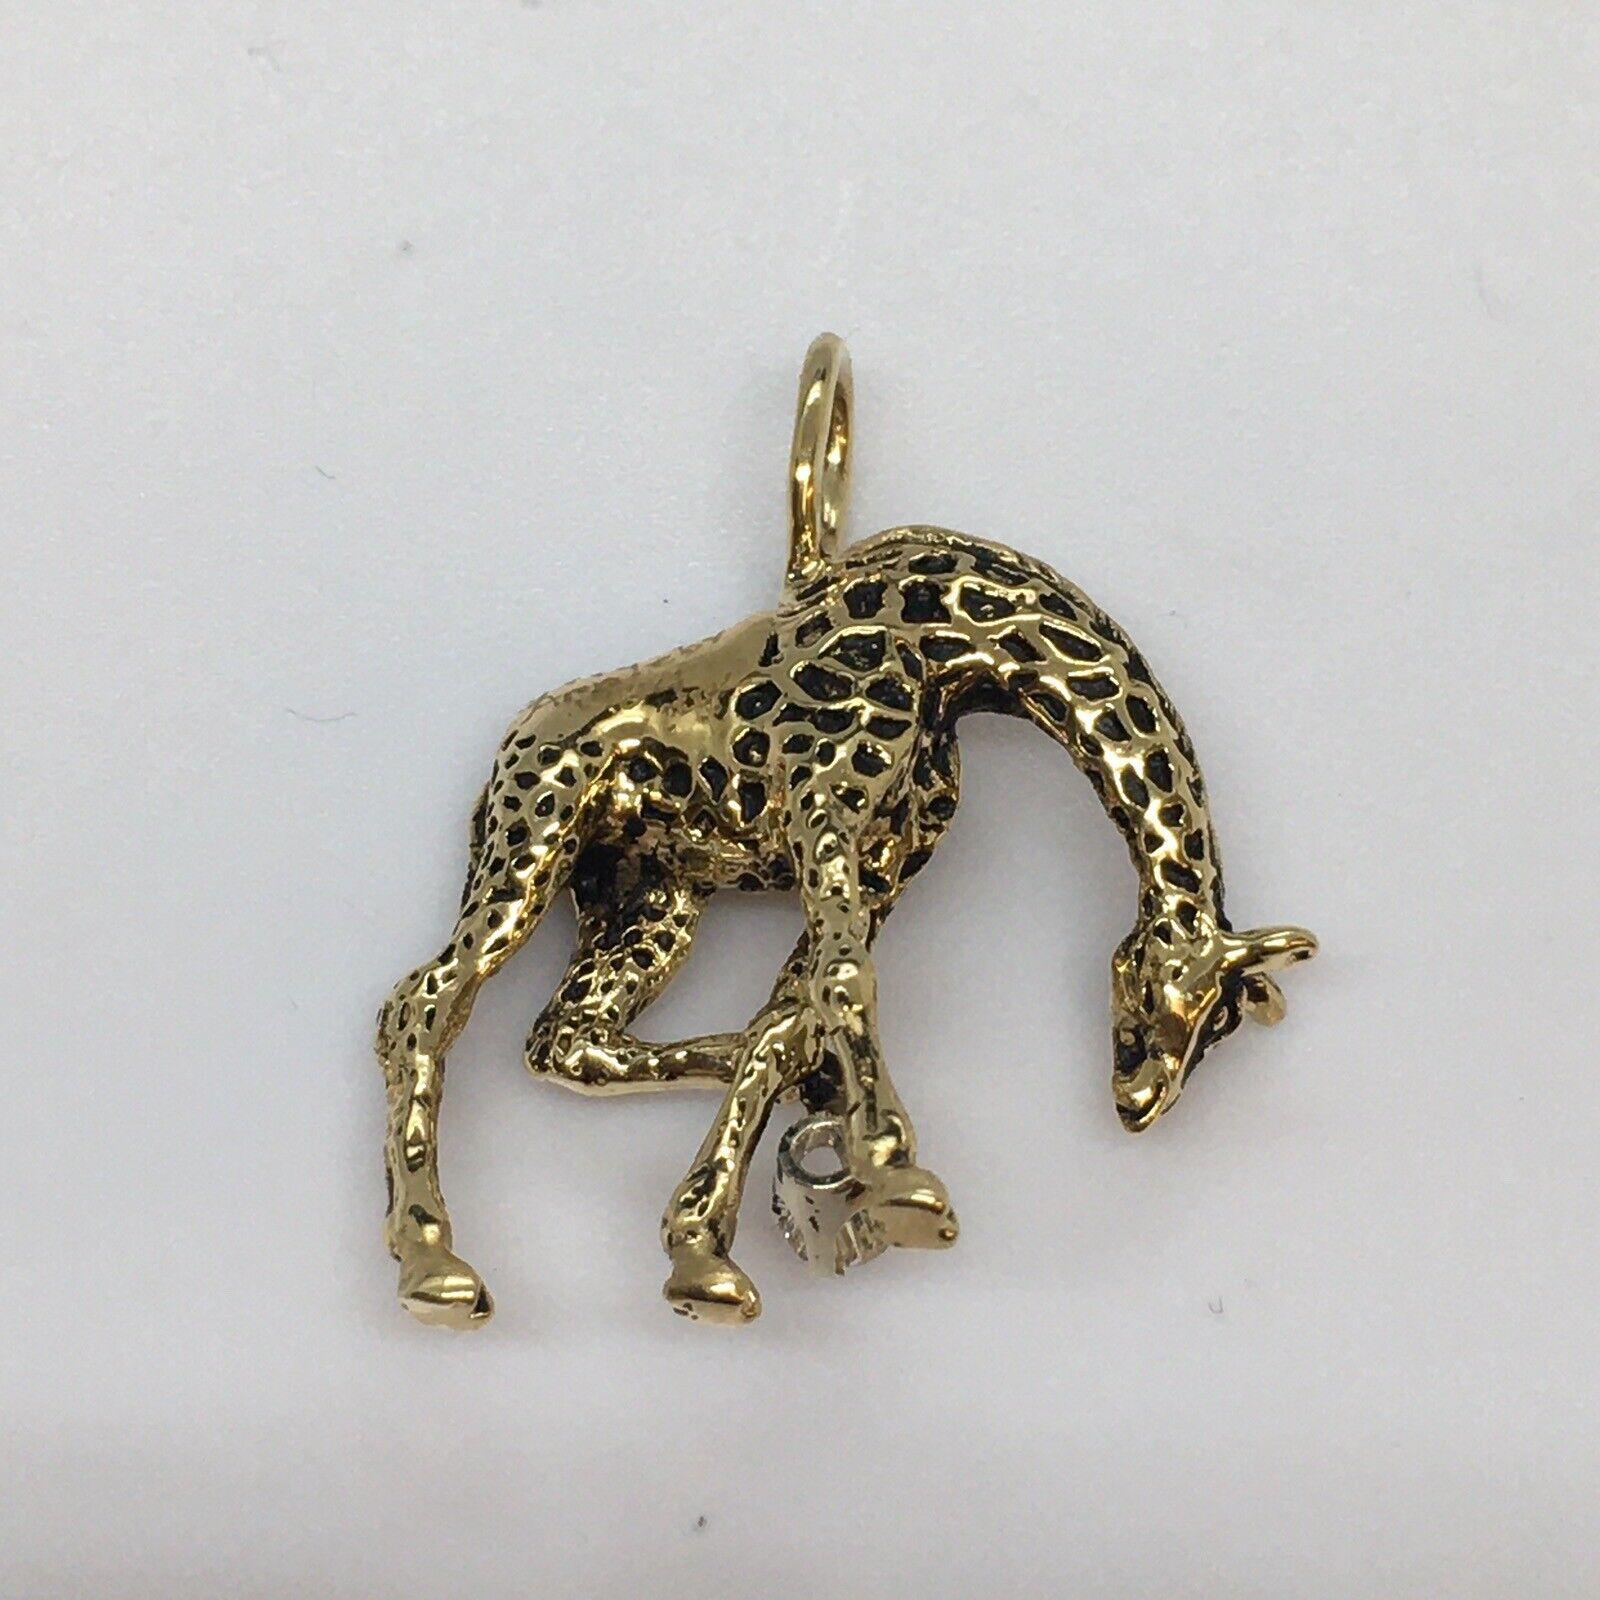 G & G Appleby 14 Karat Yellow Gold Diamond and Enamel Walking Giraffe Necklace

Gregory A. Appleby born in Van Nuys, Ca. He partnered with Gayle Bright and began sculpting precious metal jewelry. Their work has been featured in many galleries. 